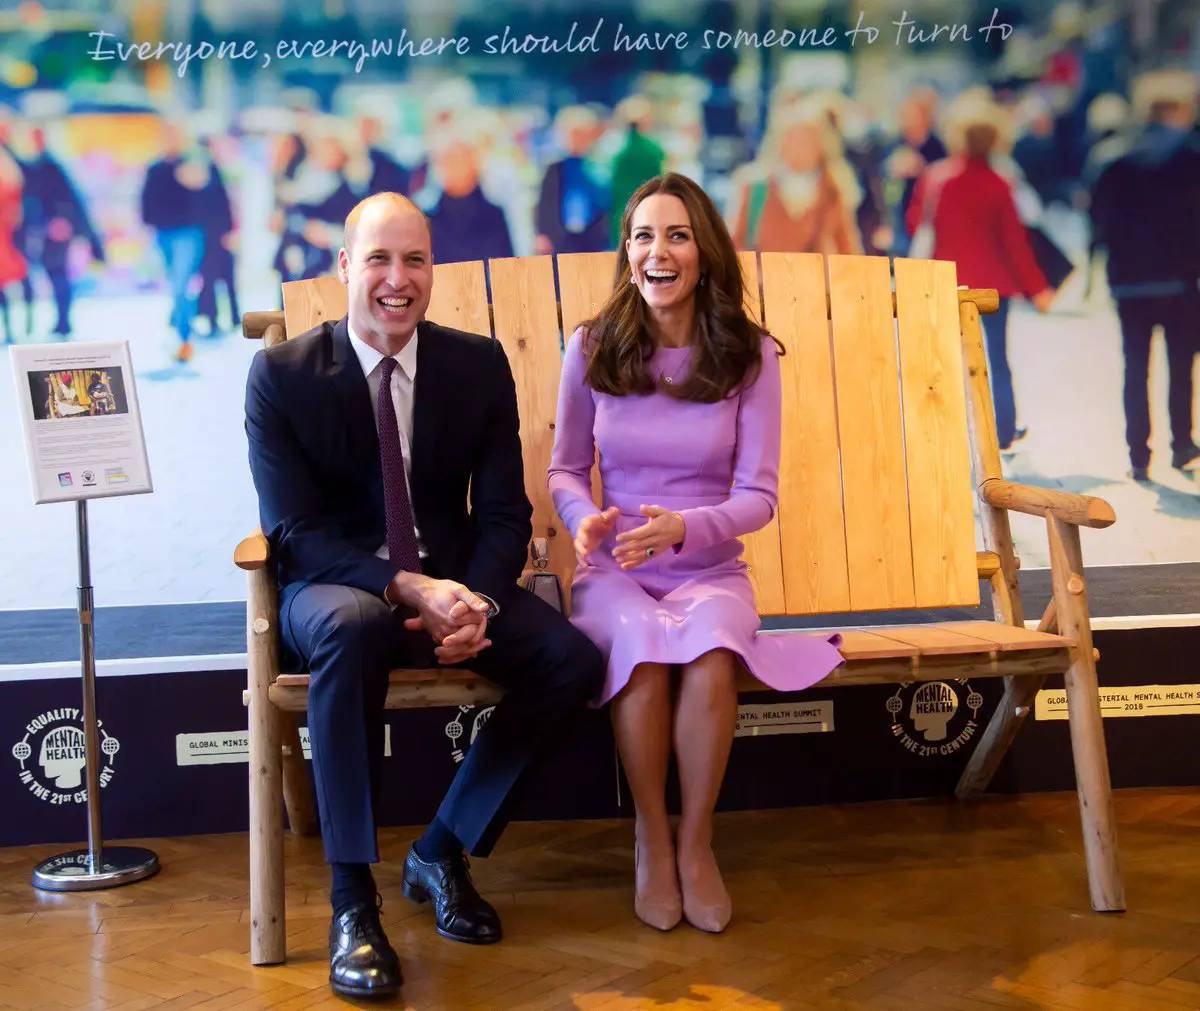 The Duke and Duchess sat down on the replica of the first friendship bench